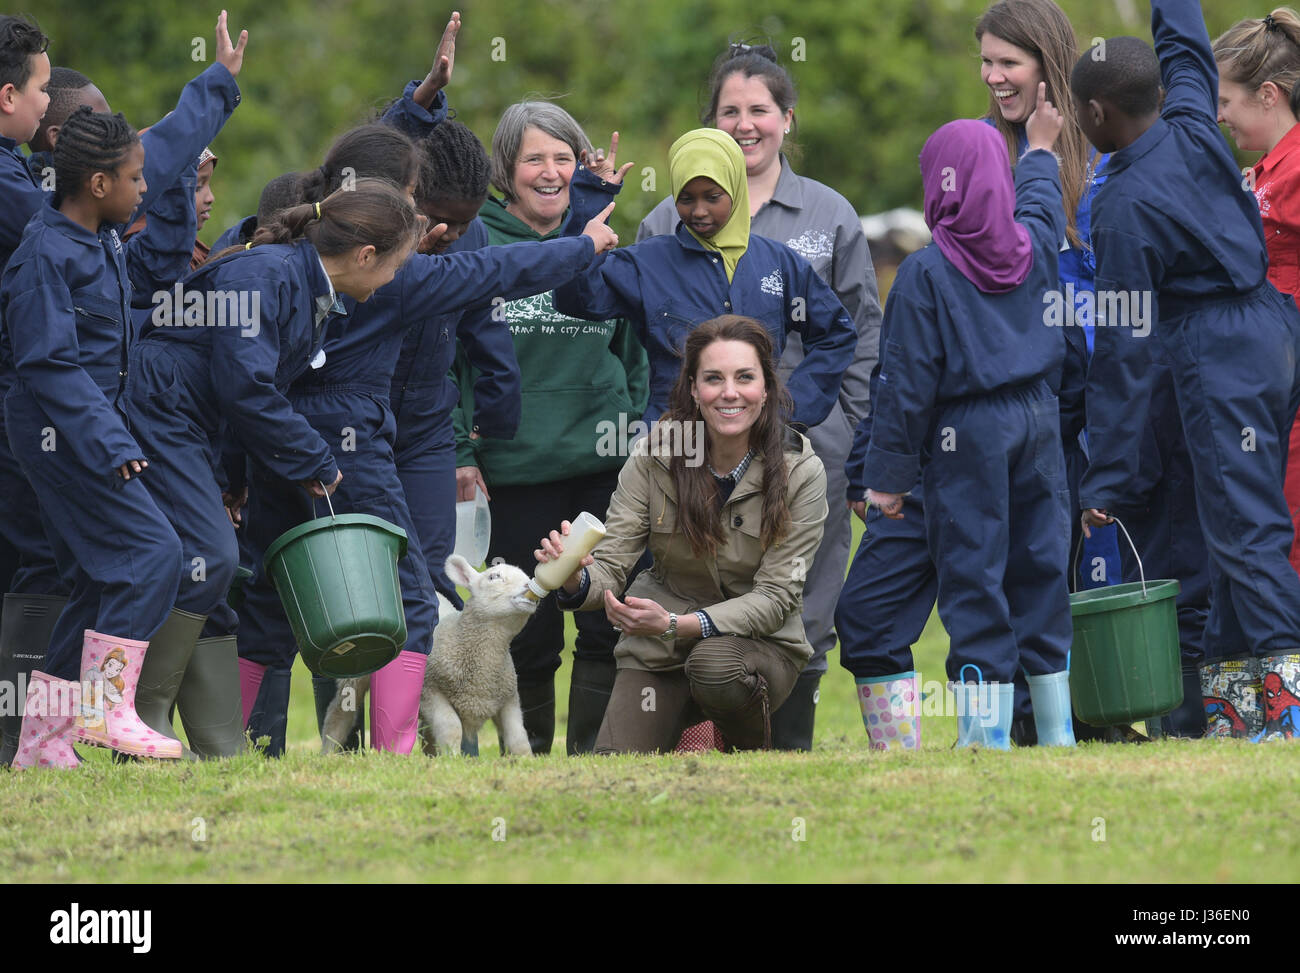 The Duchess of Cambridge in a field with school children during a visit to the Farms for City Children charity in Gloucester, where she saw their work giving young people from inner cities the chance to spend a week on a working farm. Stock Photo